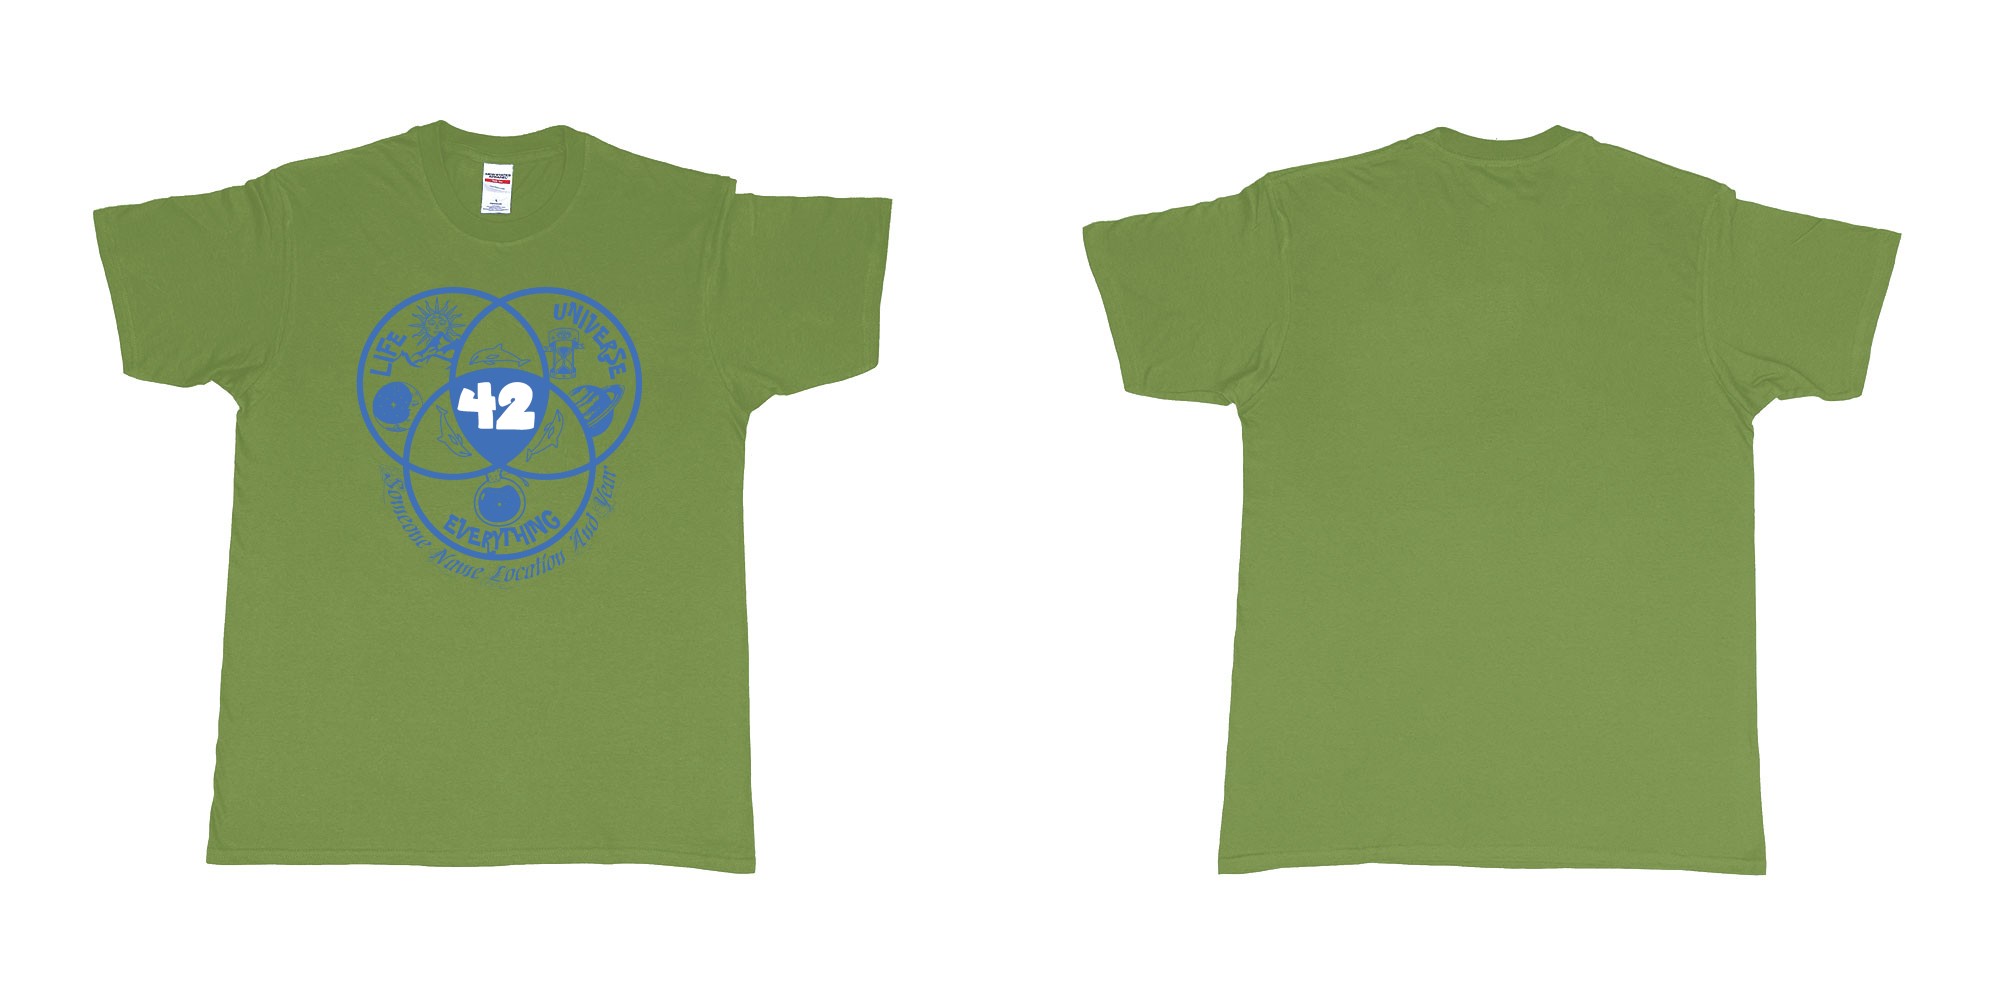 Custom tshirt design 42 everything in fabric color military-green choice your own text made in Bali by The Pirate Way